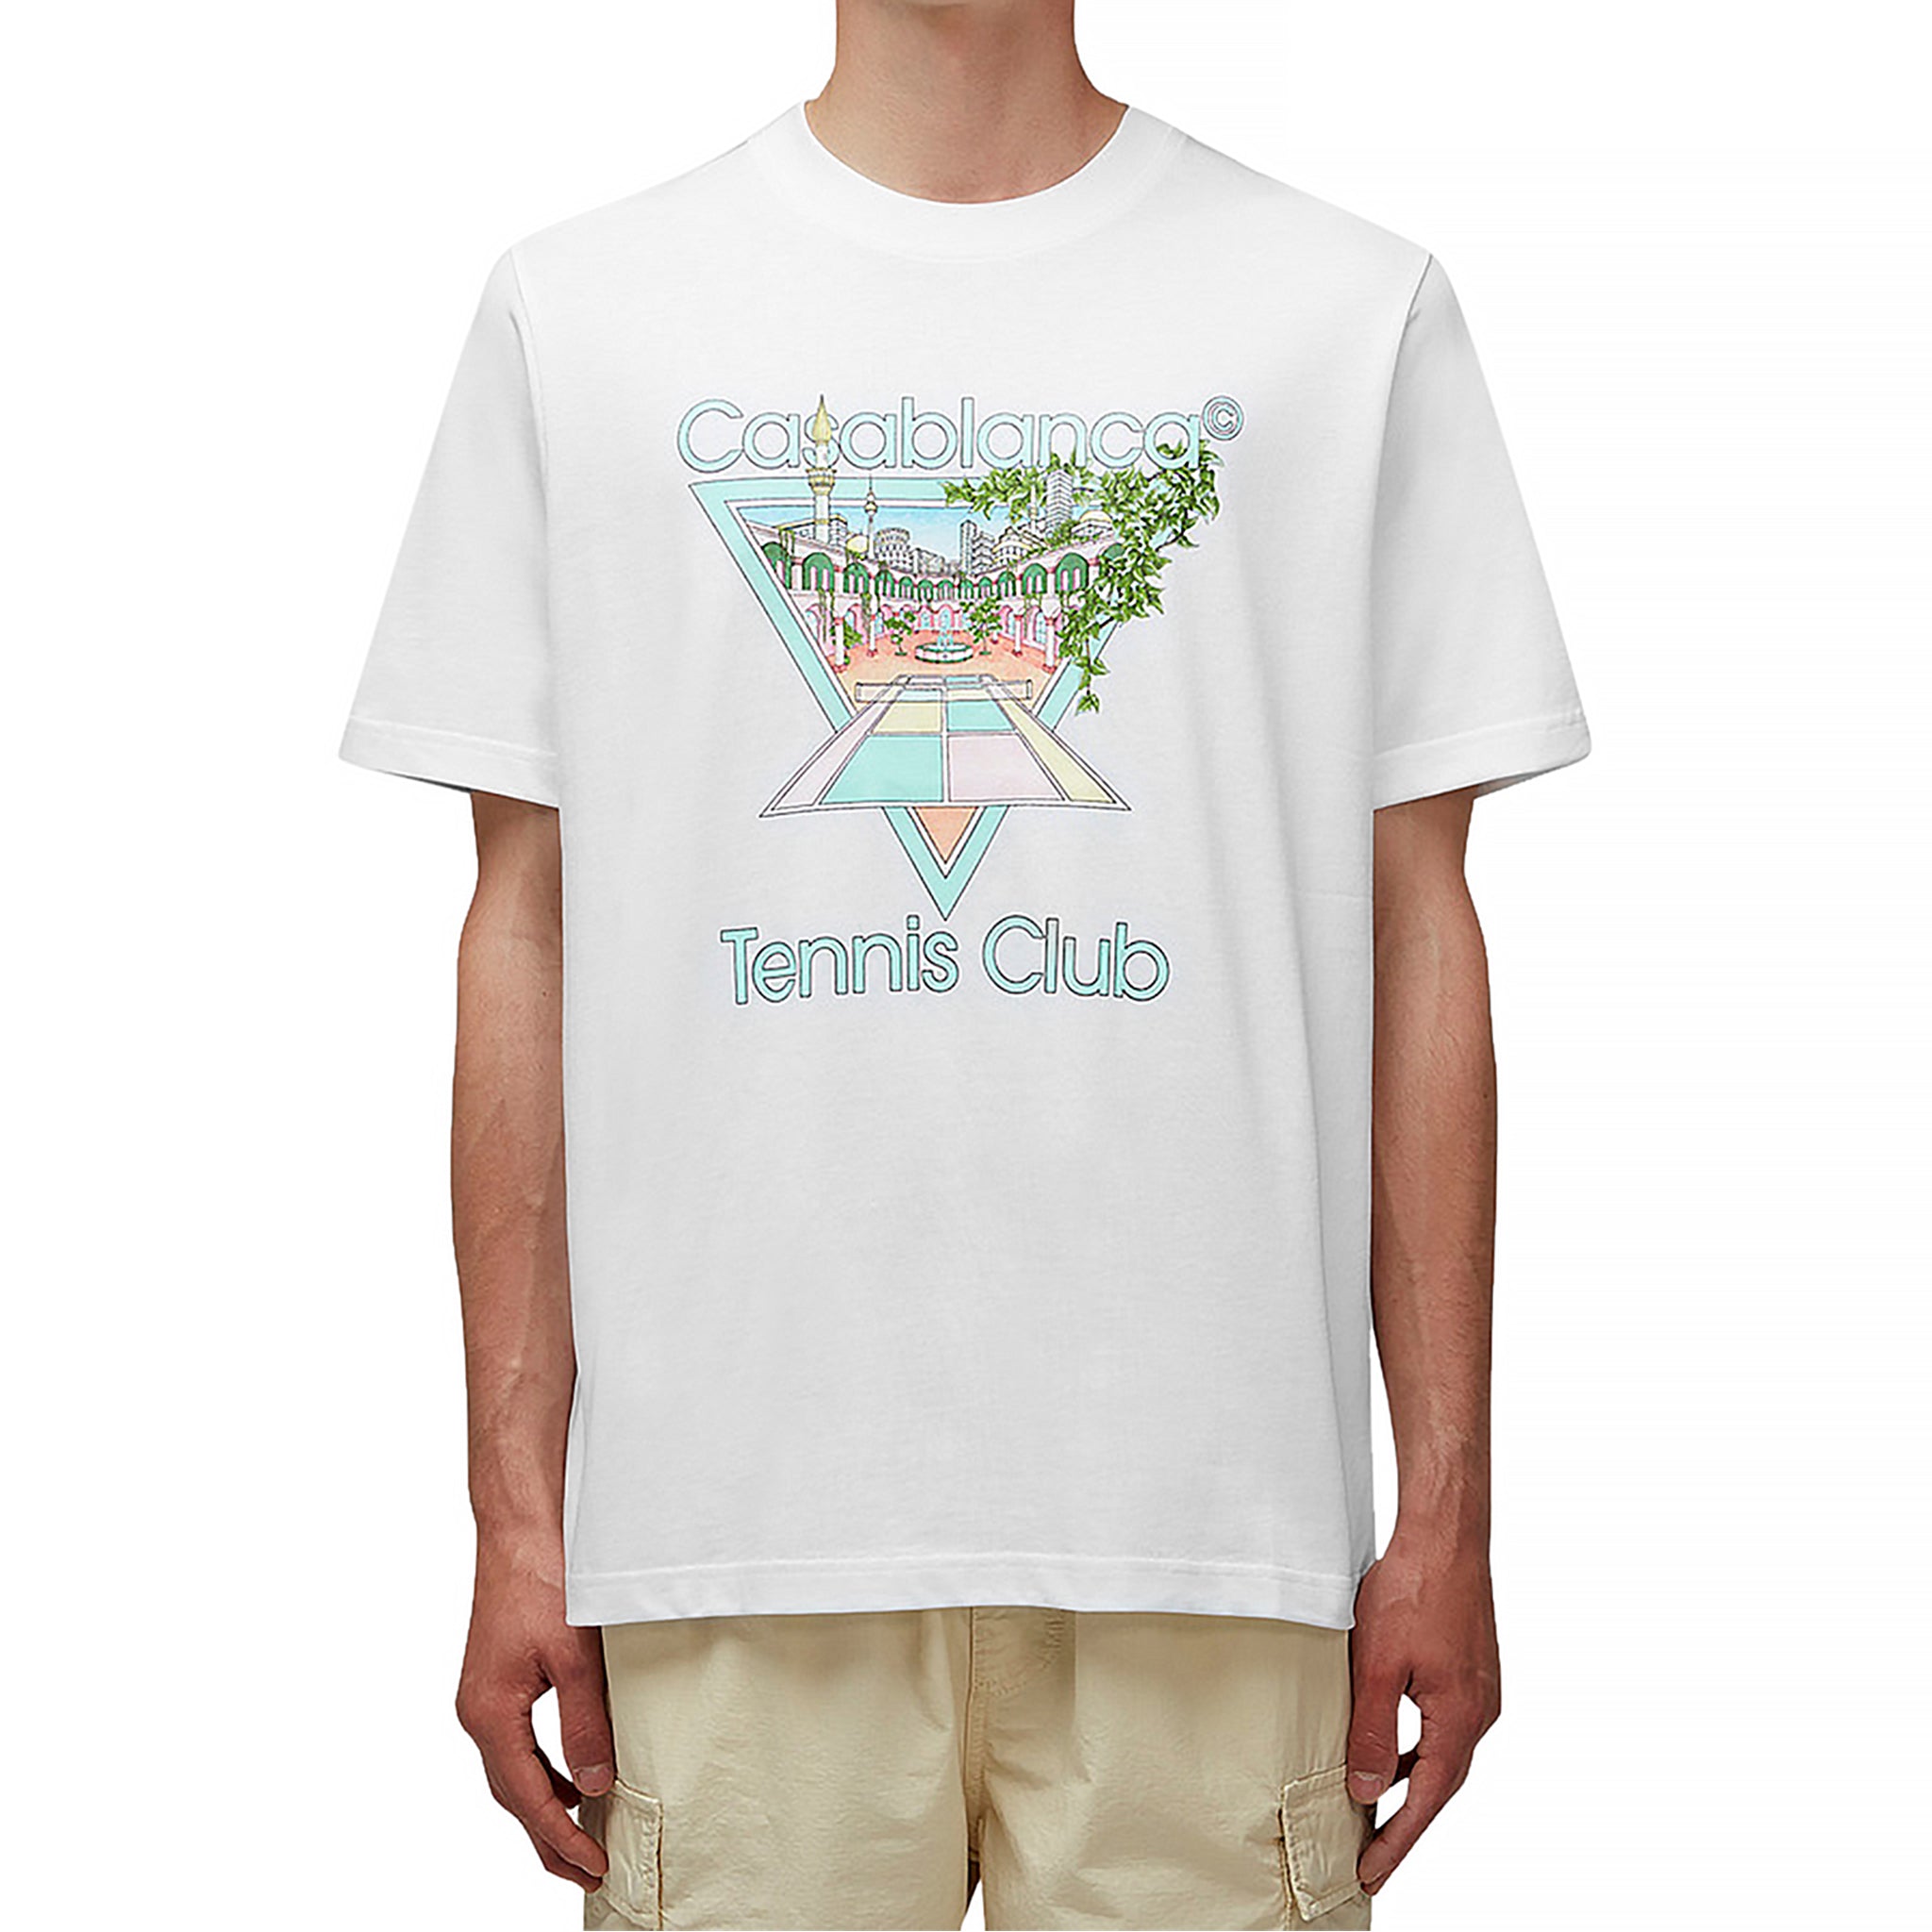 Model front view of Casablanca Tennis Club Printed T Shirt White Pastelle MF23-JTS-001-13